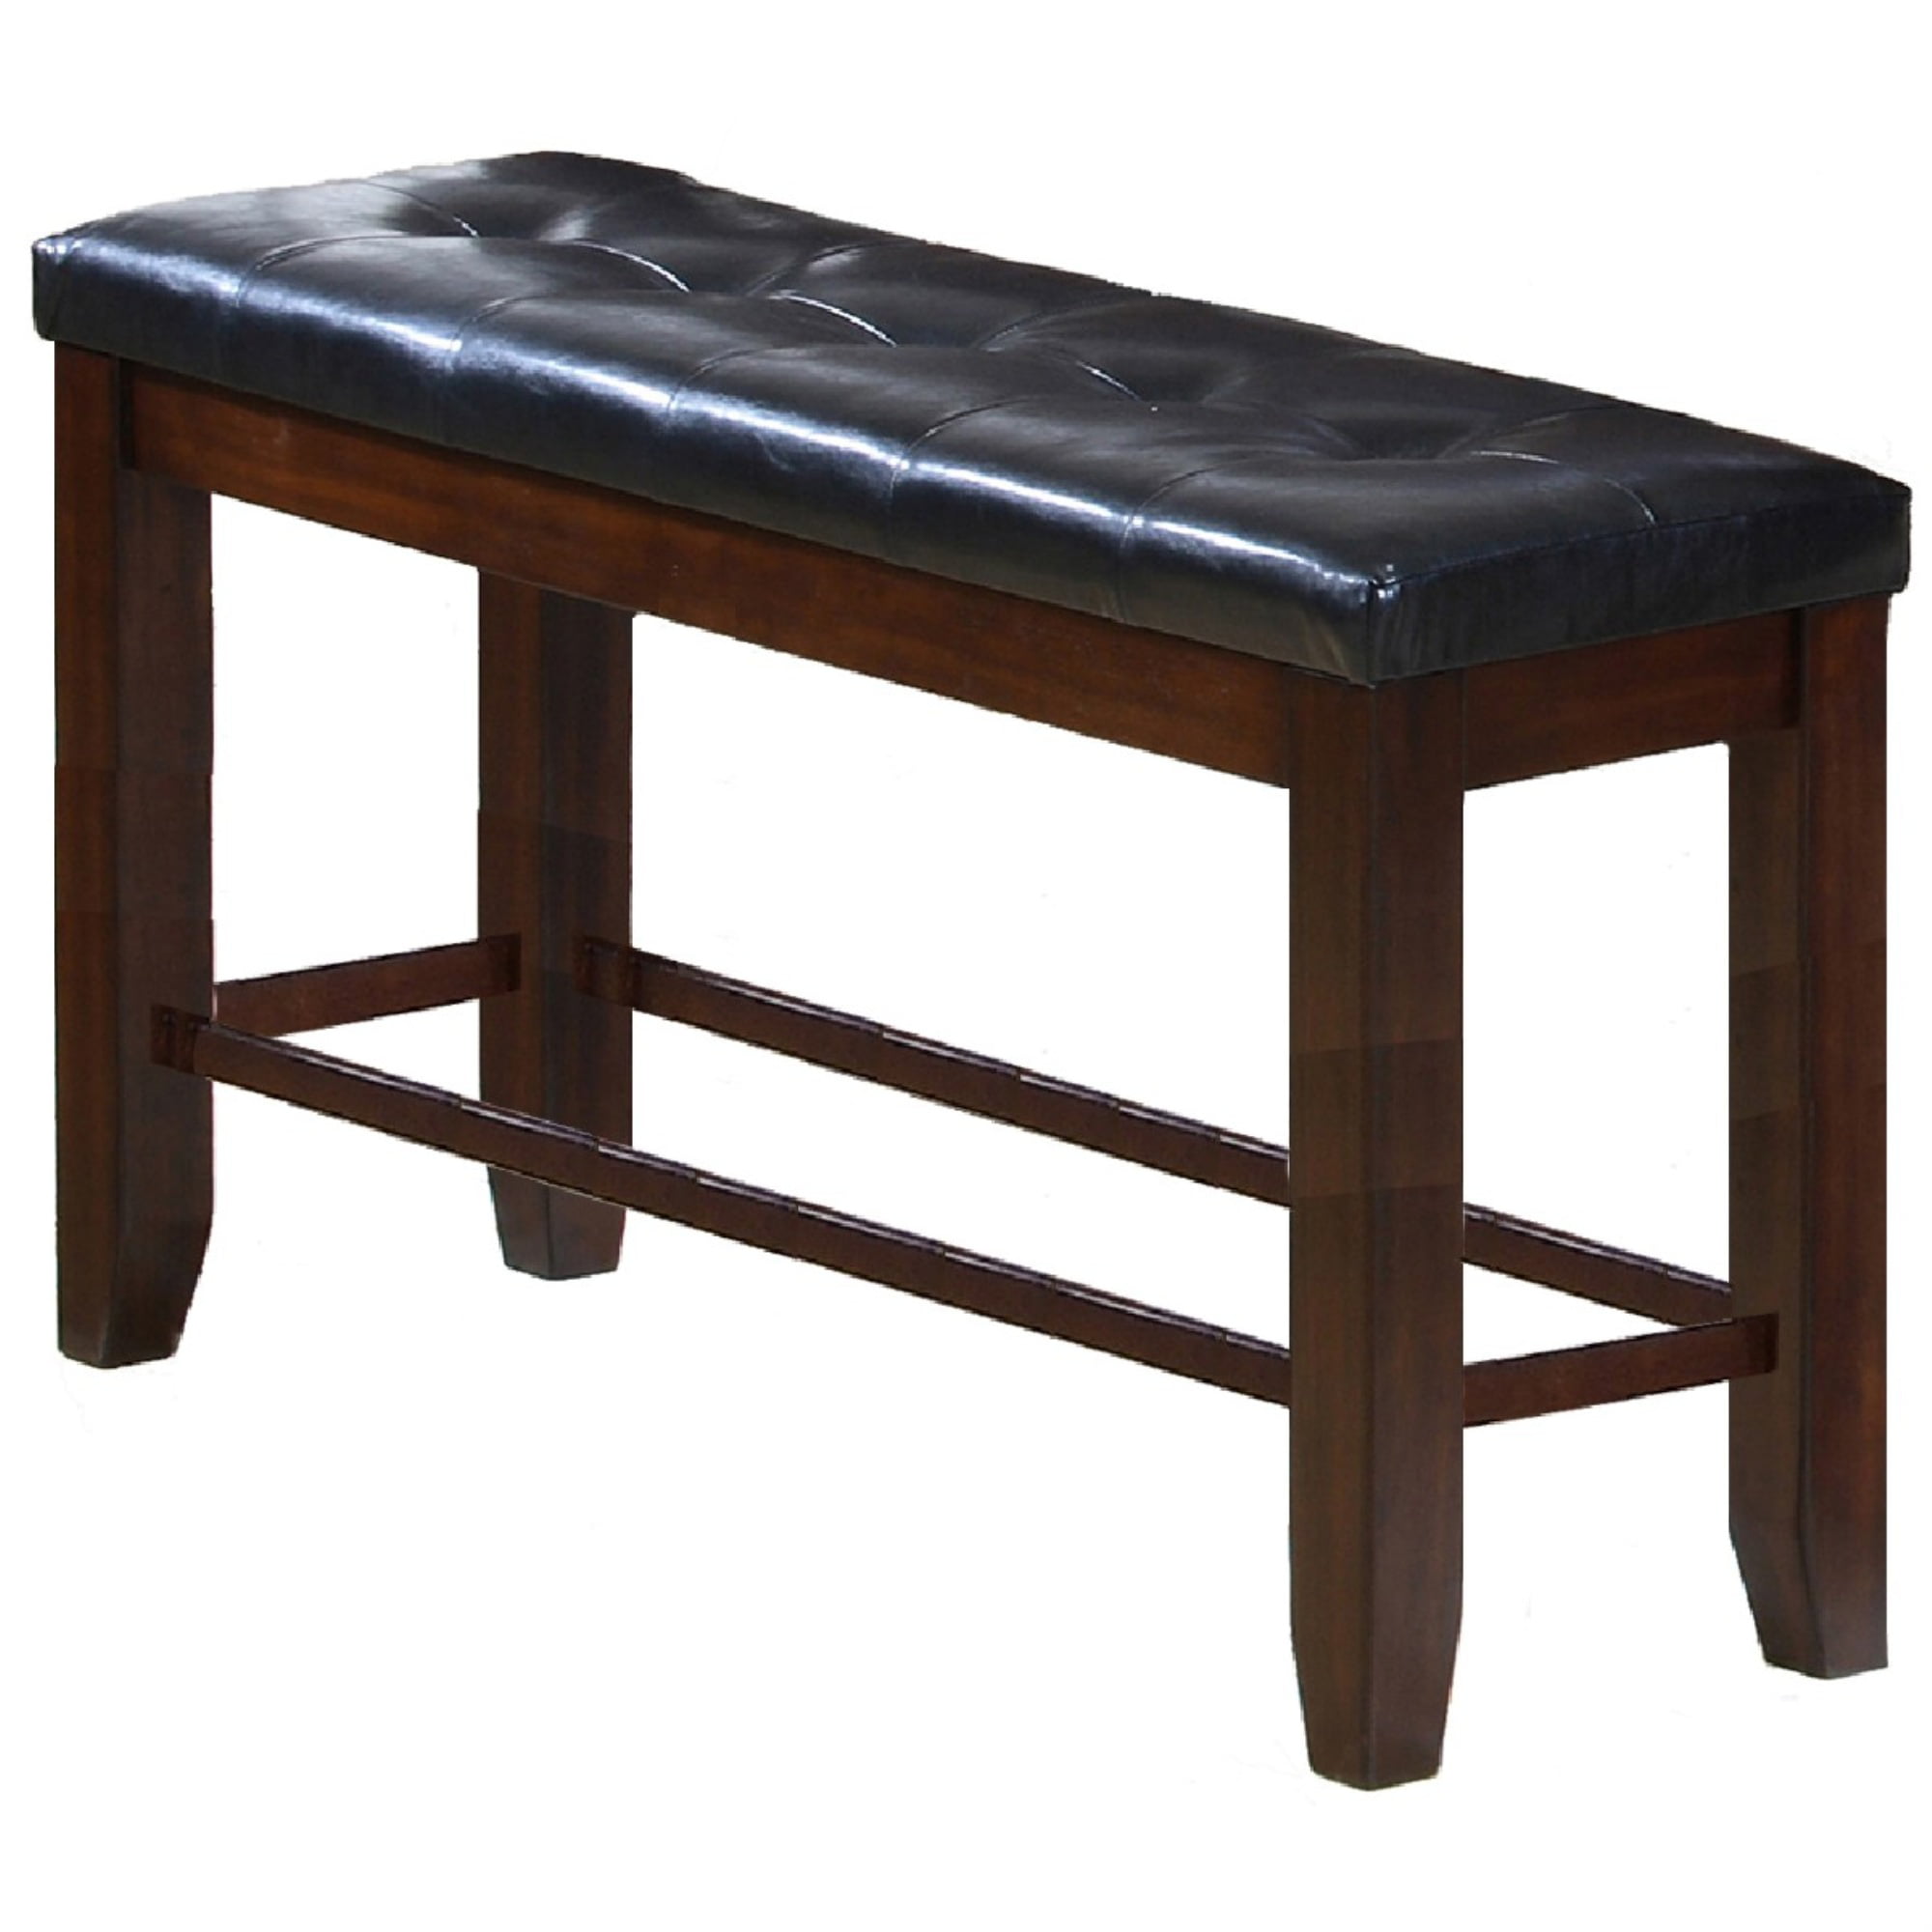 Counter Height Bench with Button Tufted Leatherette Seat, Black and